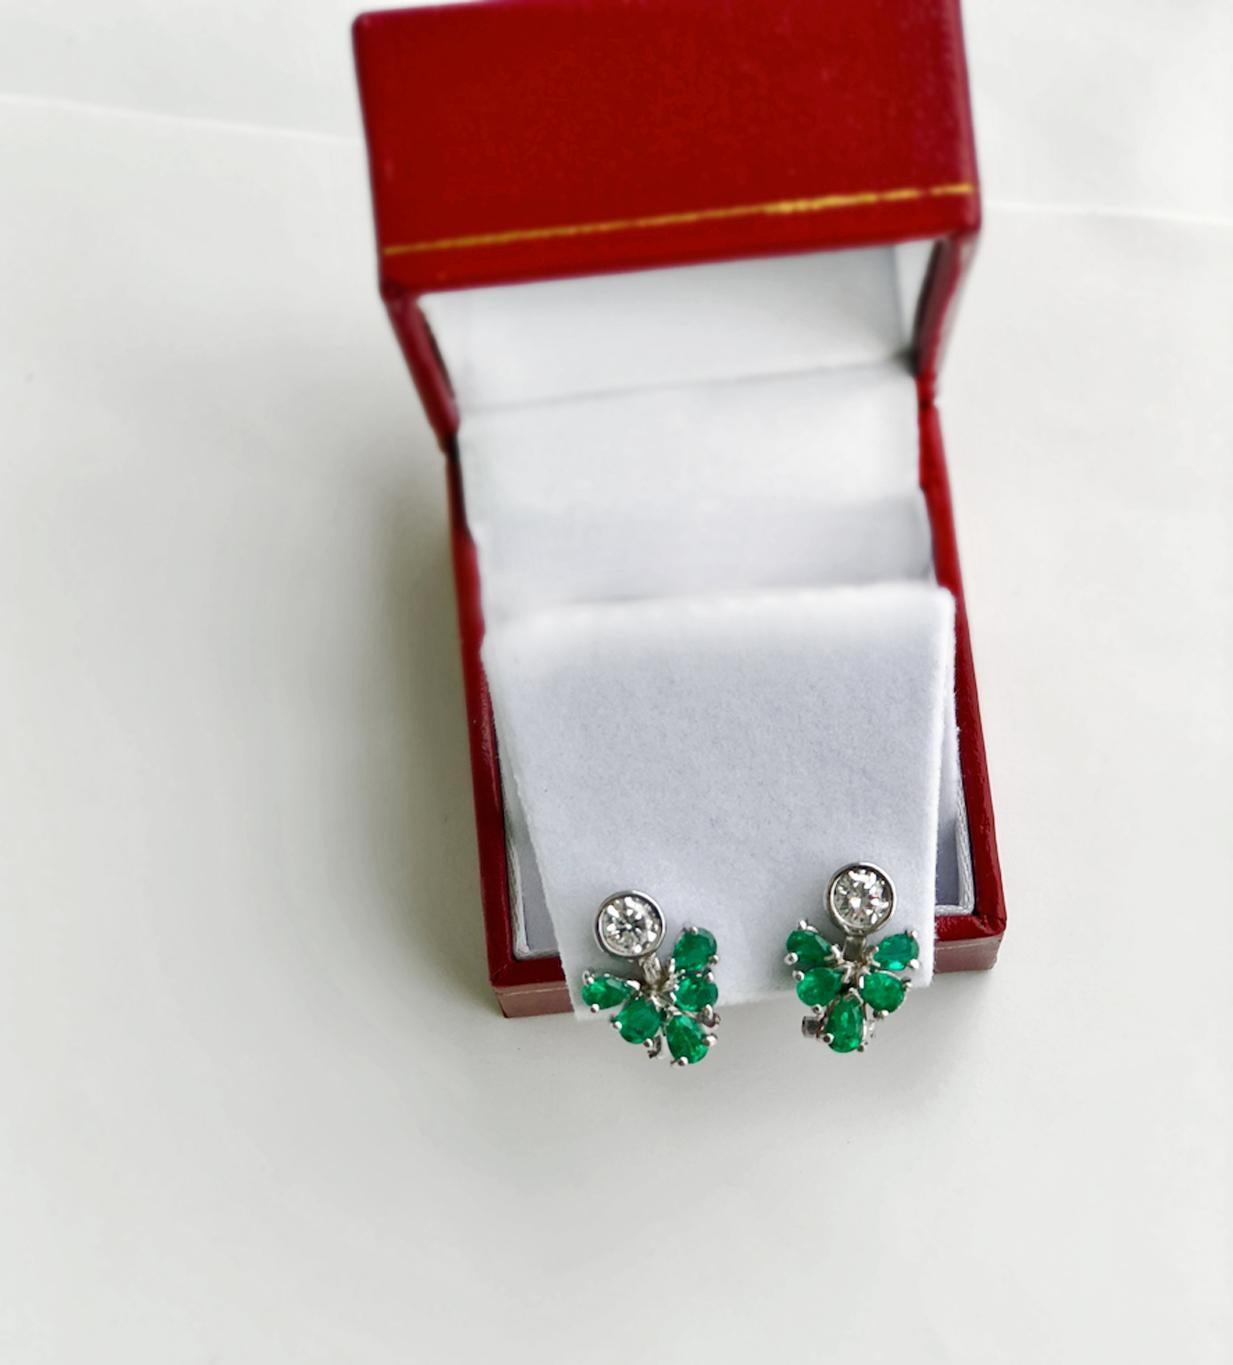 Gorgeous 2.50 Carat Colombian Natural Emerald Diamond Cluster Cocktail Clip-on Earrings.
Primary Stone: 100% Natural Colombian Emerald
Shape or Cut: Pear Cut
Emerald Weight: Over 1.50 Carats
Average Color/Clarity Emerald: AAA+ Intense Medium Bluish